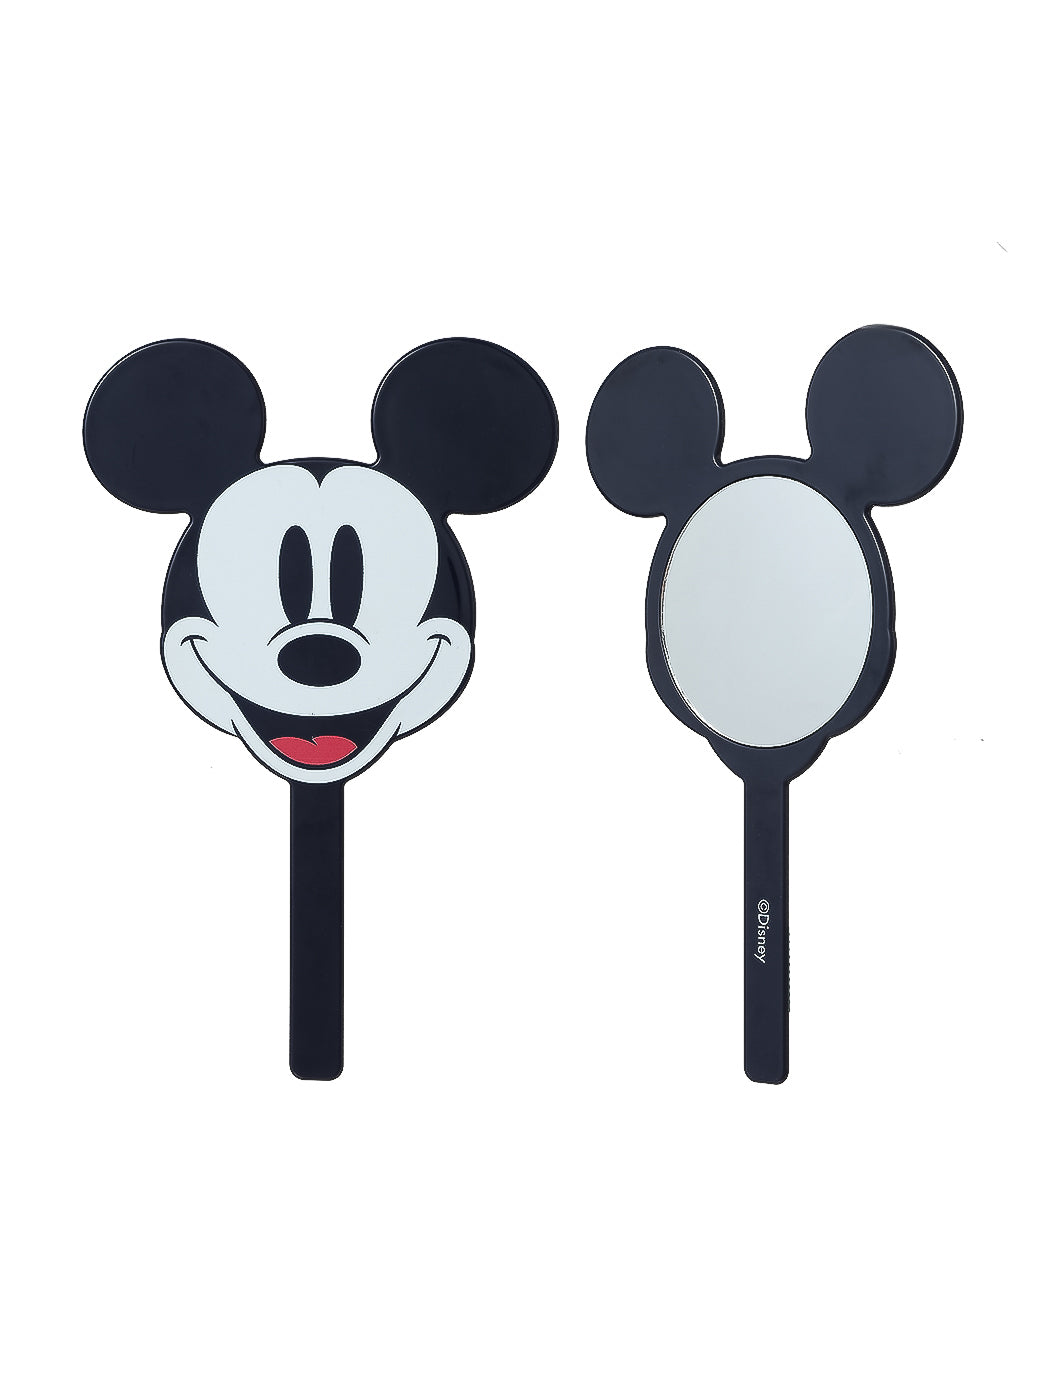 MINISO MICKEY MOUSE COLLECTION 2.0 HANDHELD MIRROR(MICKEY) 2010530111105 PORTABLE MIRROR